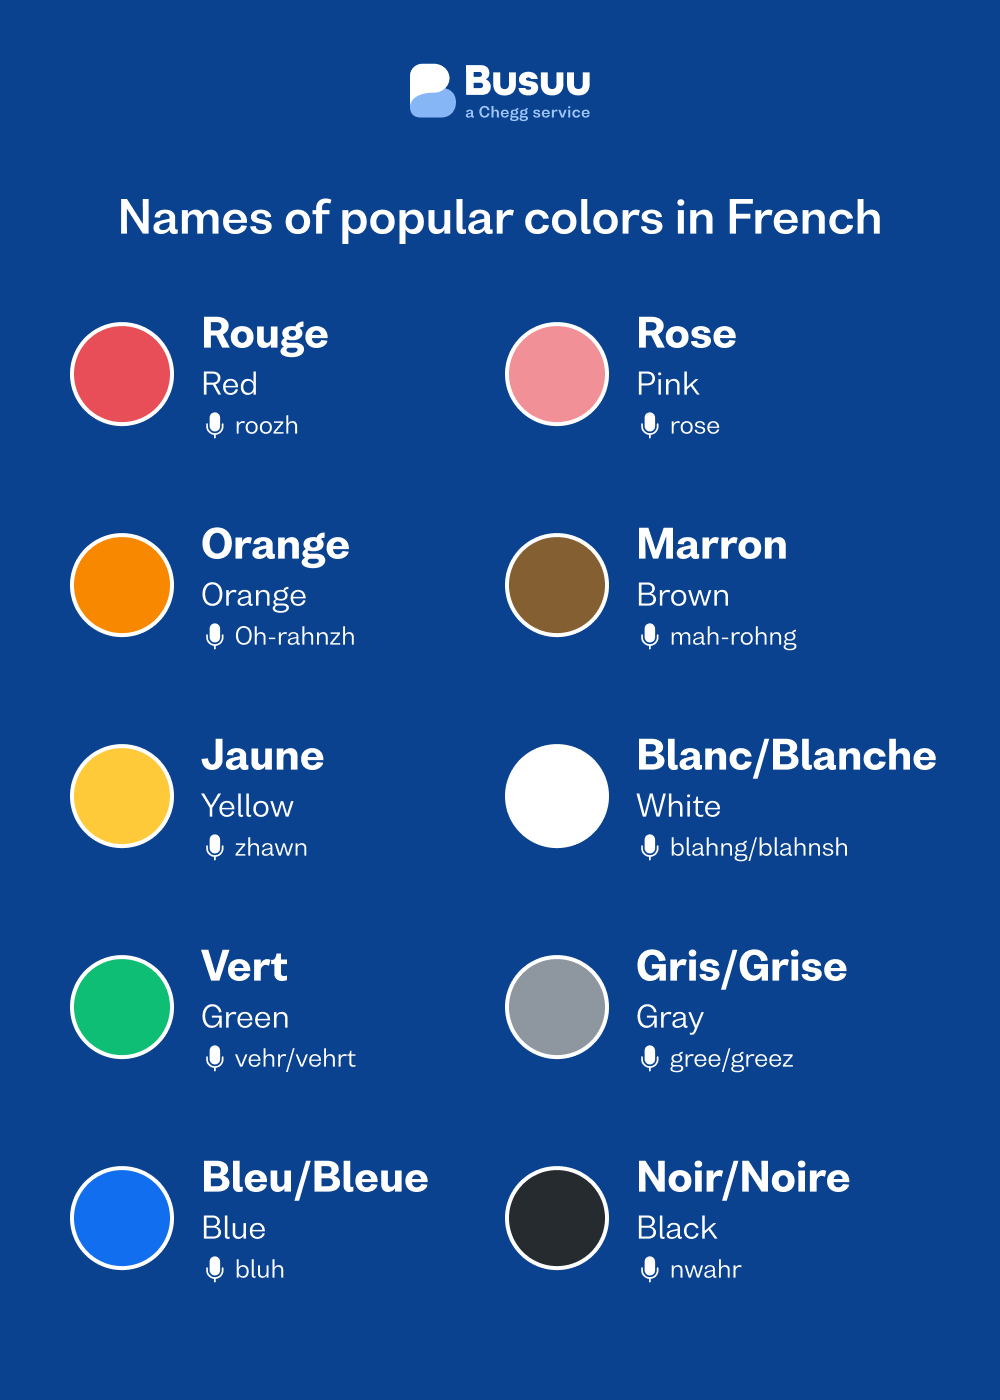 Names of popular colors in French